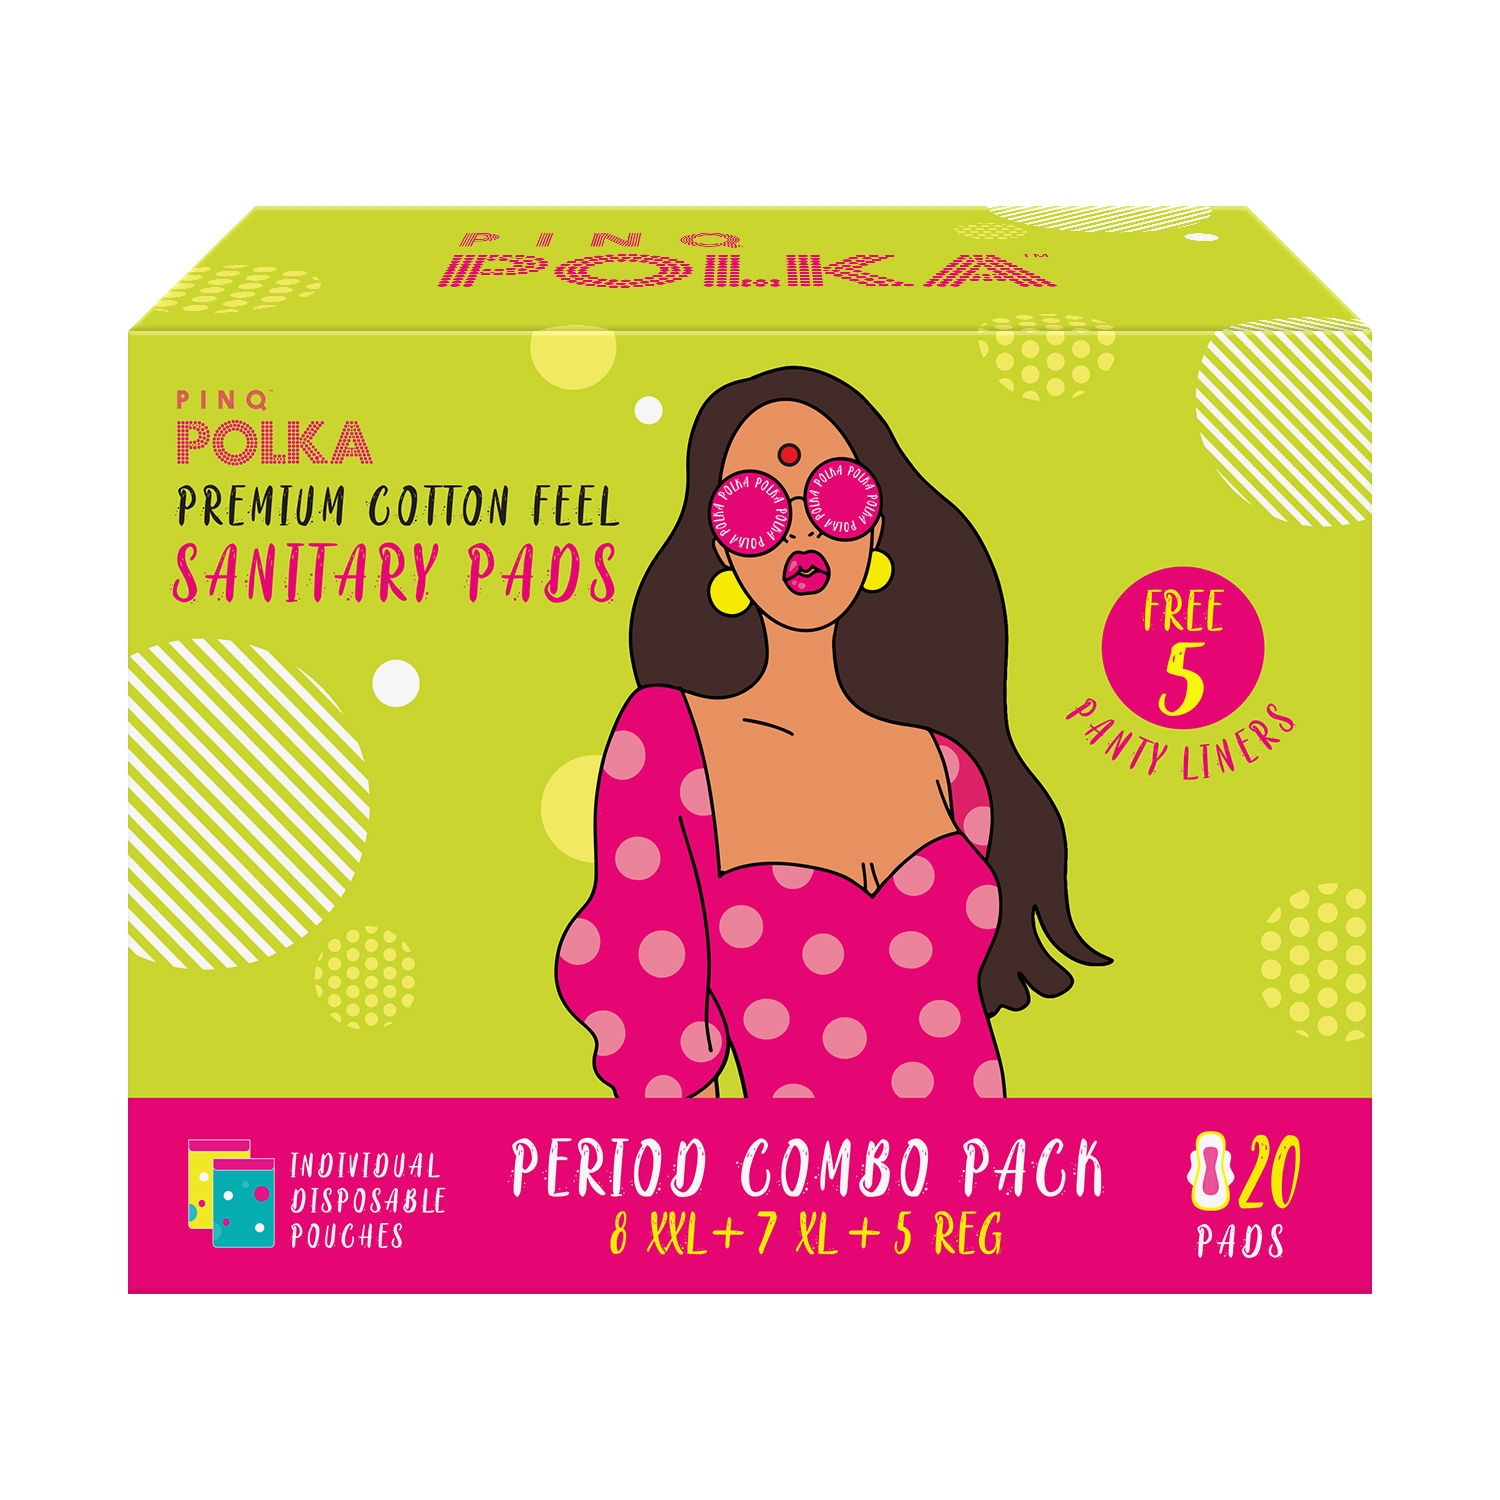 PINQ Polka Premium Period Combo Pack with Individual Disposable Pouch(20 Pcs)